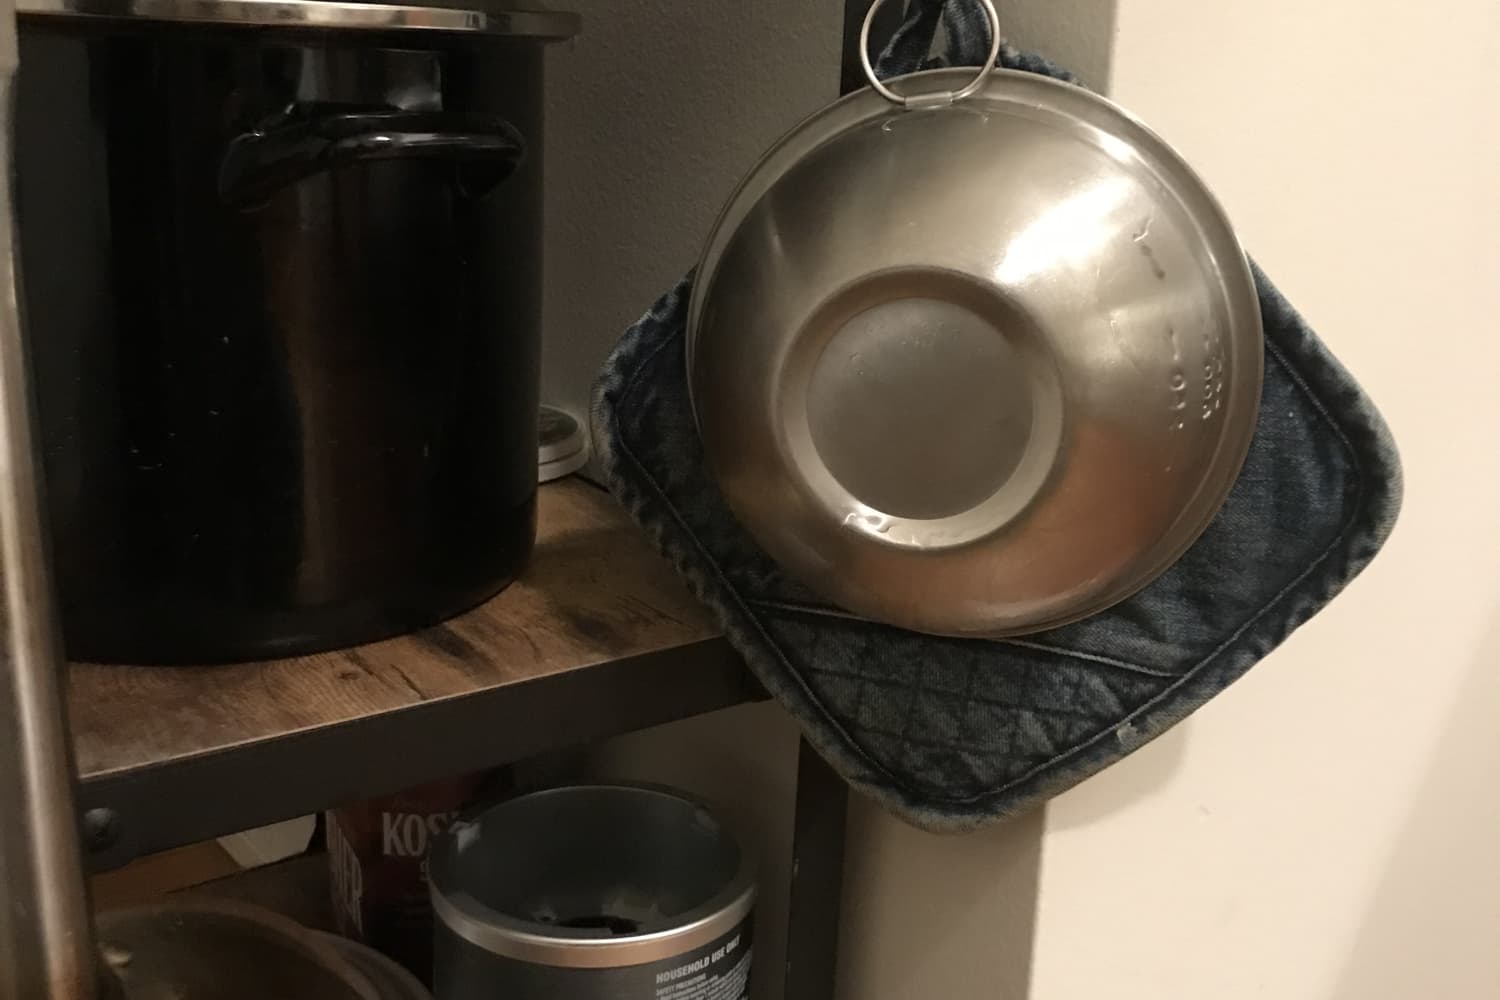 Shoppers Say These Mixing Bowls With Lids Are 'Better Than